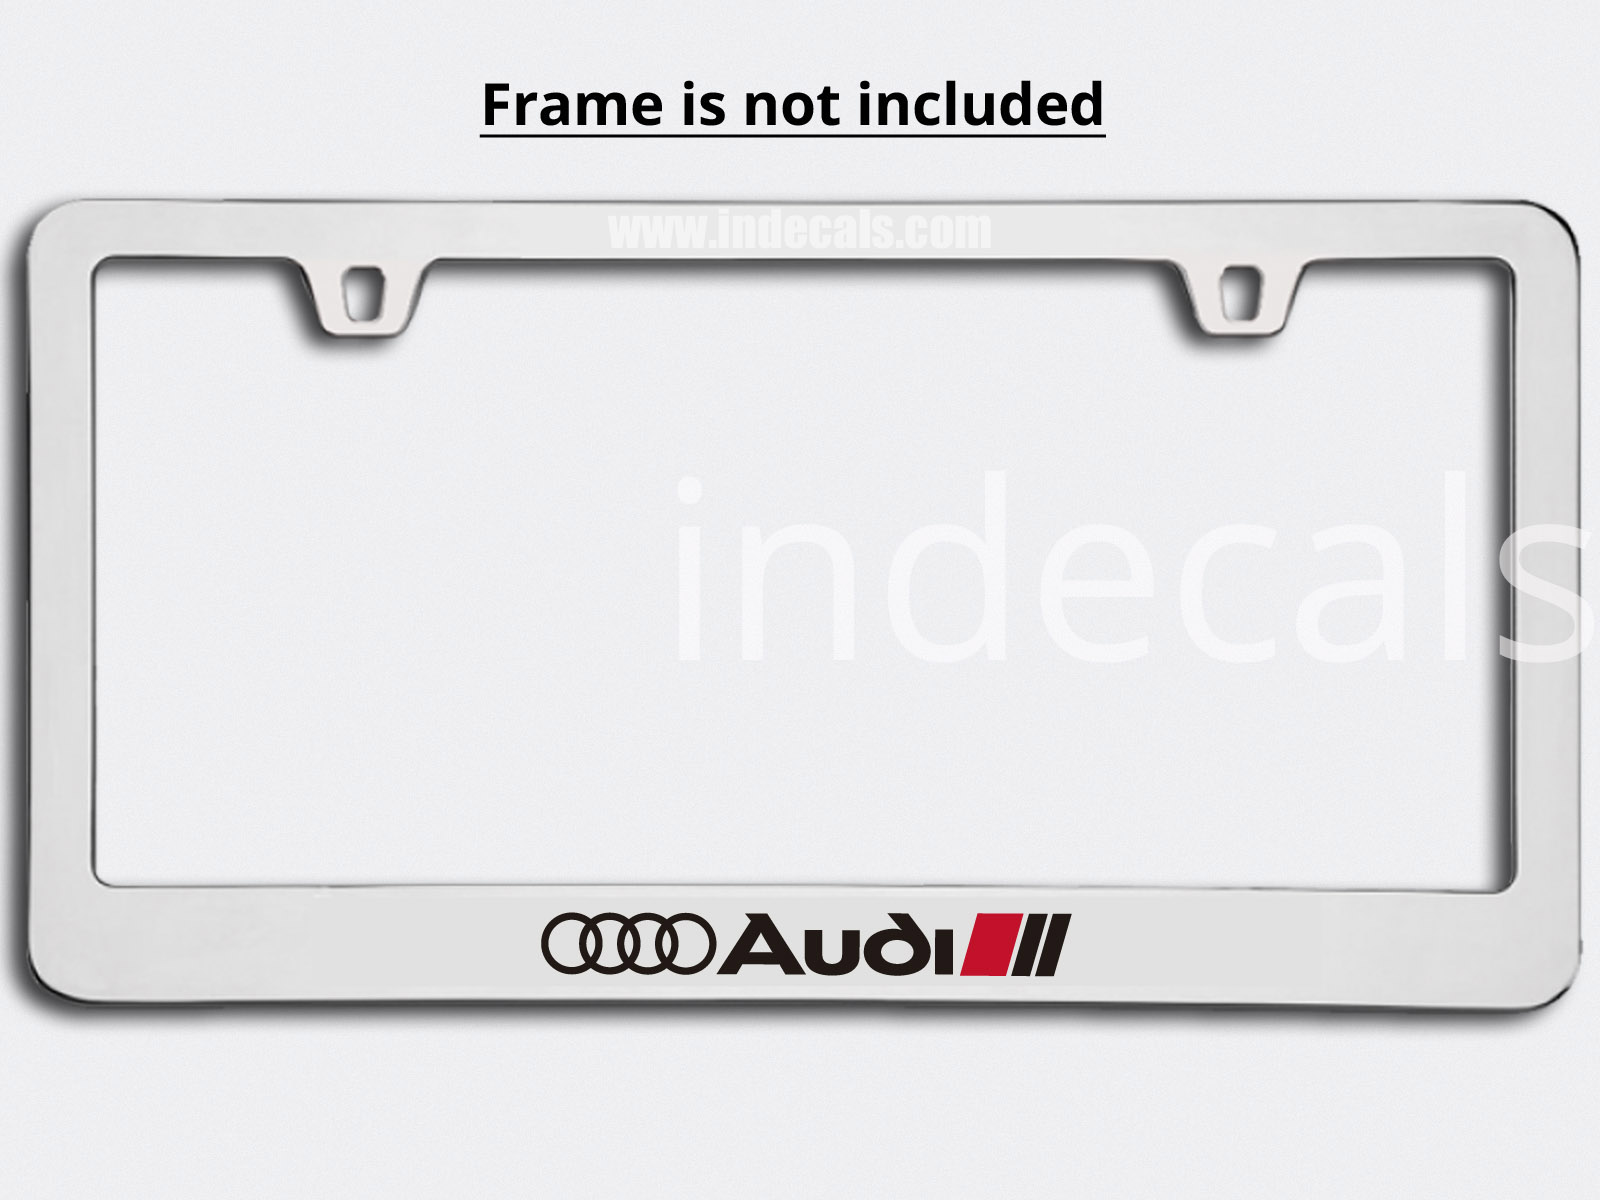 3 x Audi Stickers for Plate Frame - Black